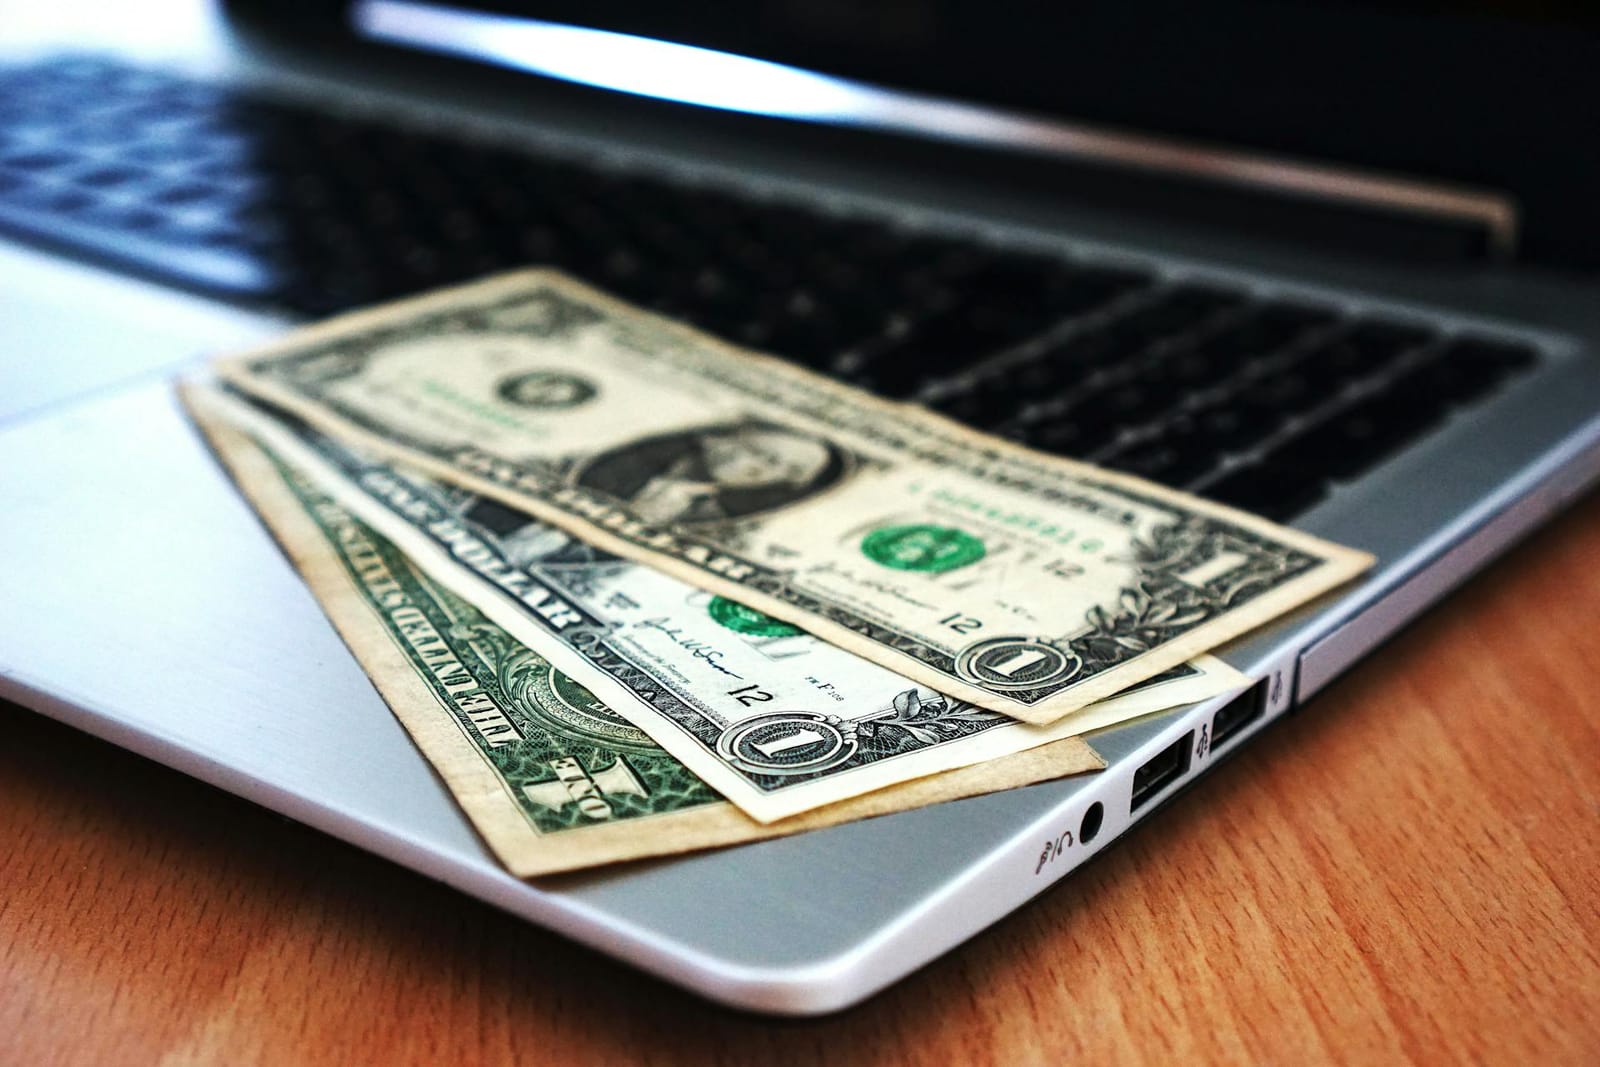 A close up of money on the laptop